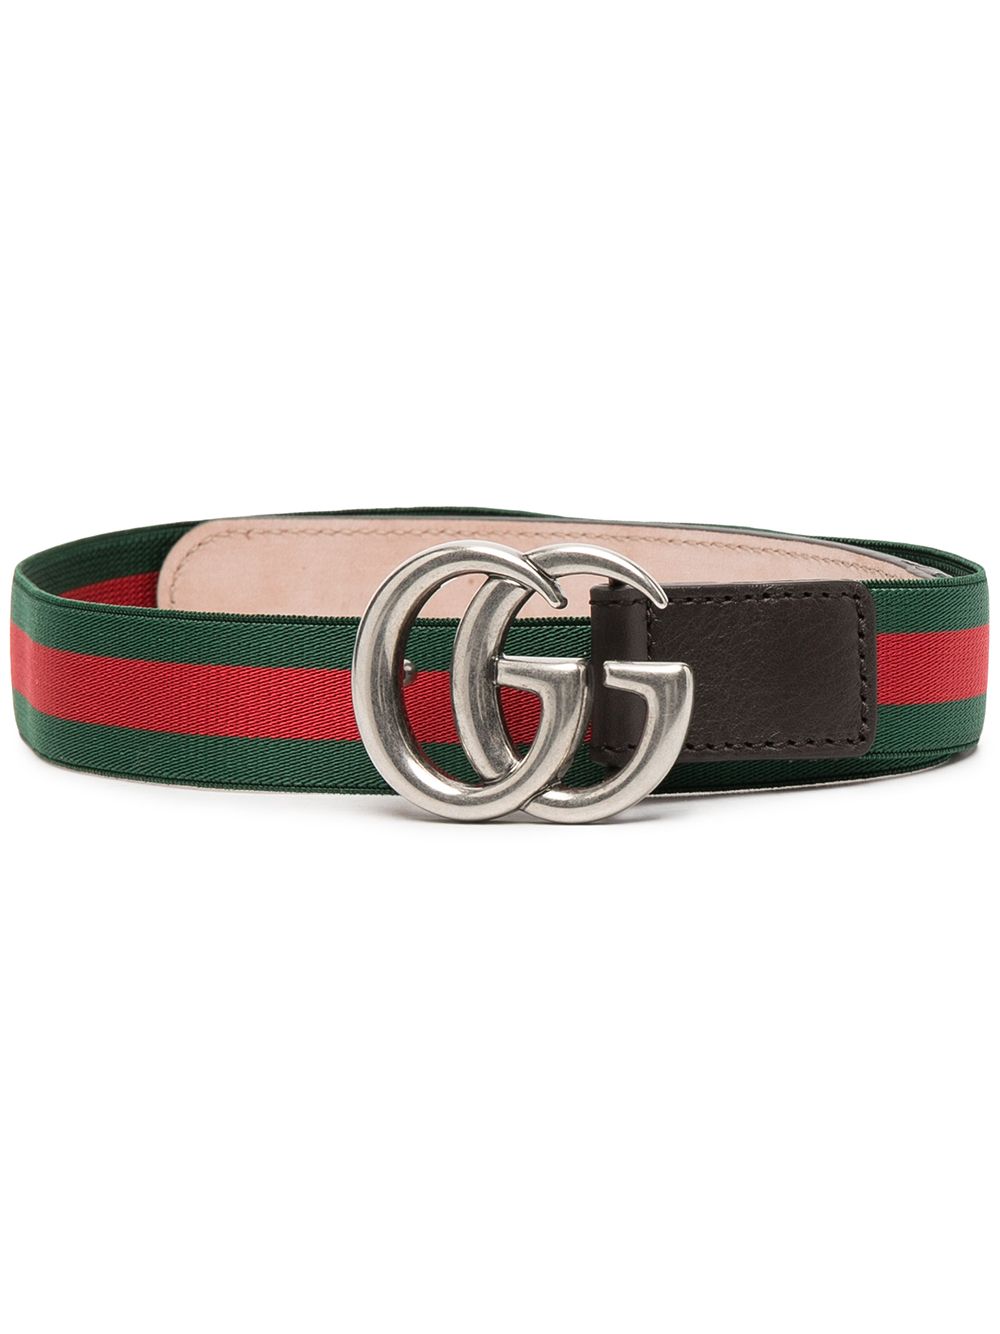 Green and red belt for children with logo